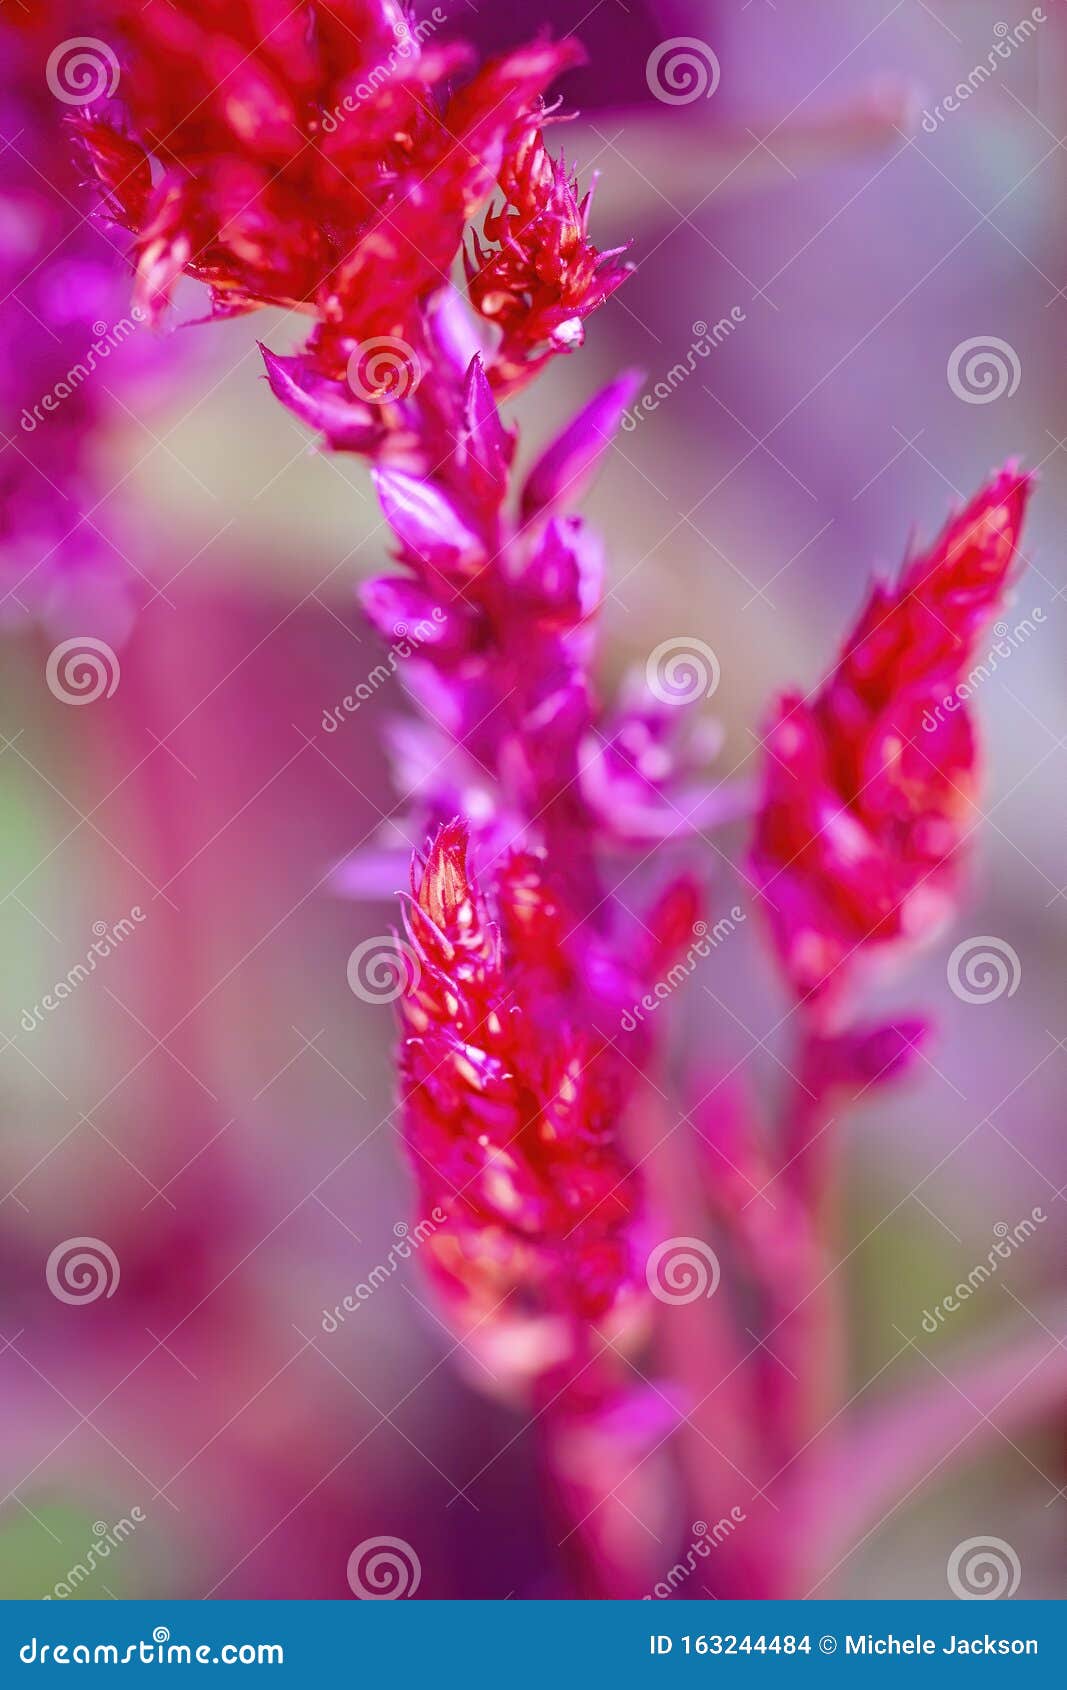 8 330 Breath Plant Photos Free Royalty Free Stock Photos From Dreamstime